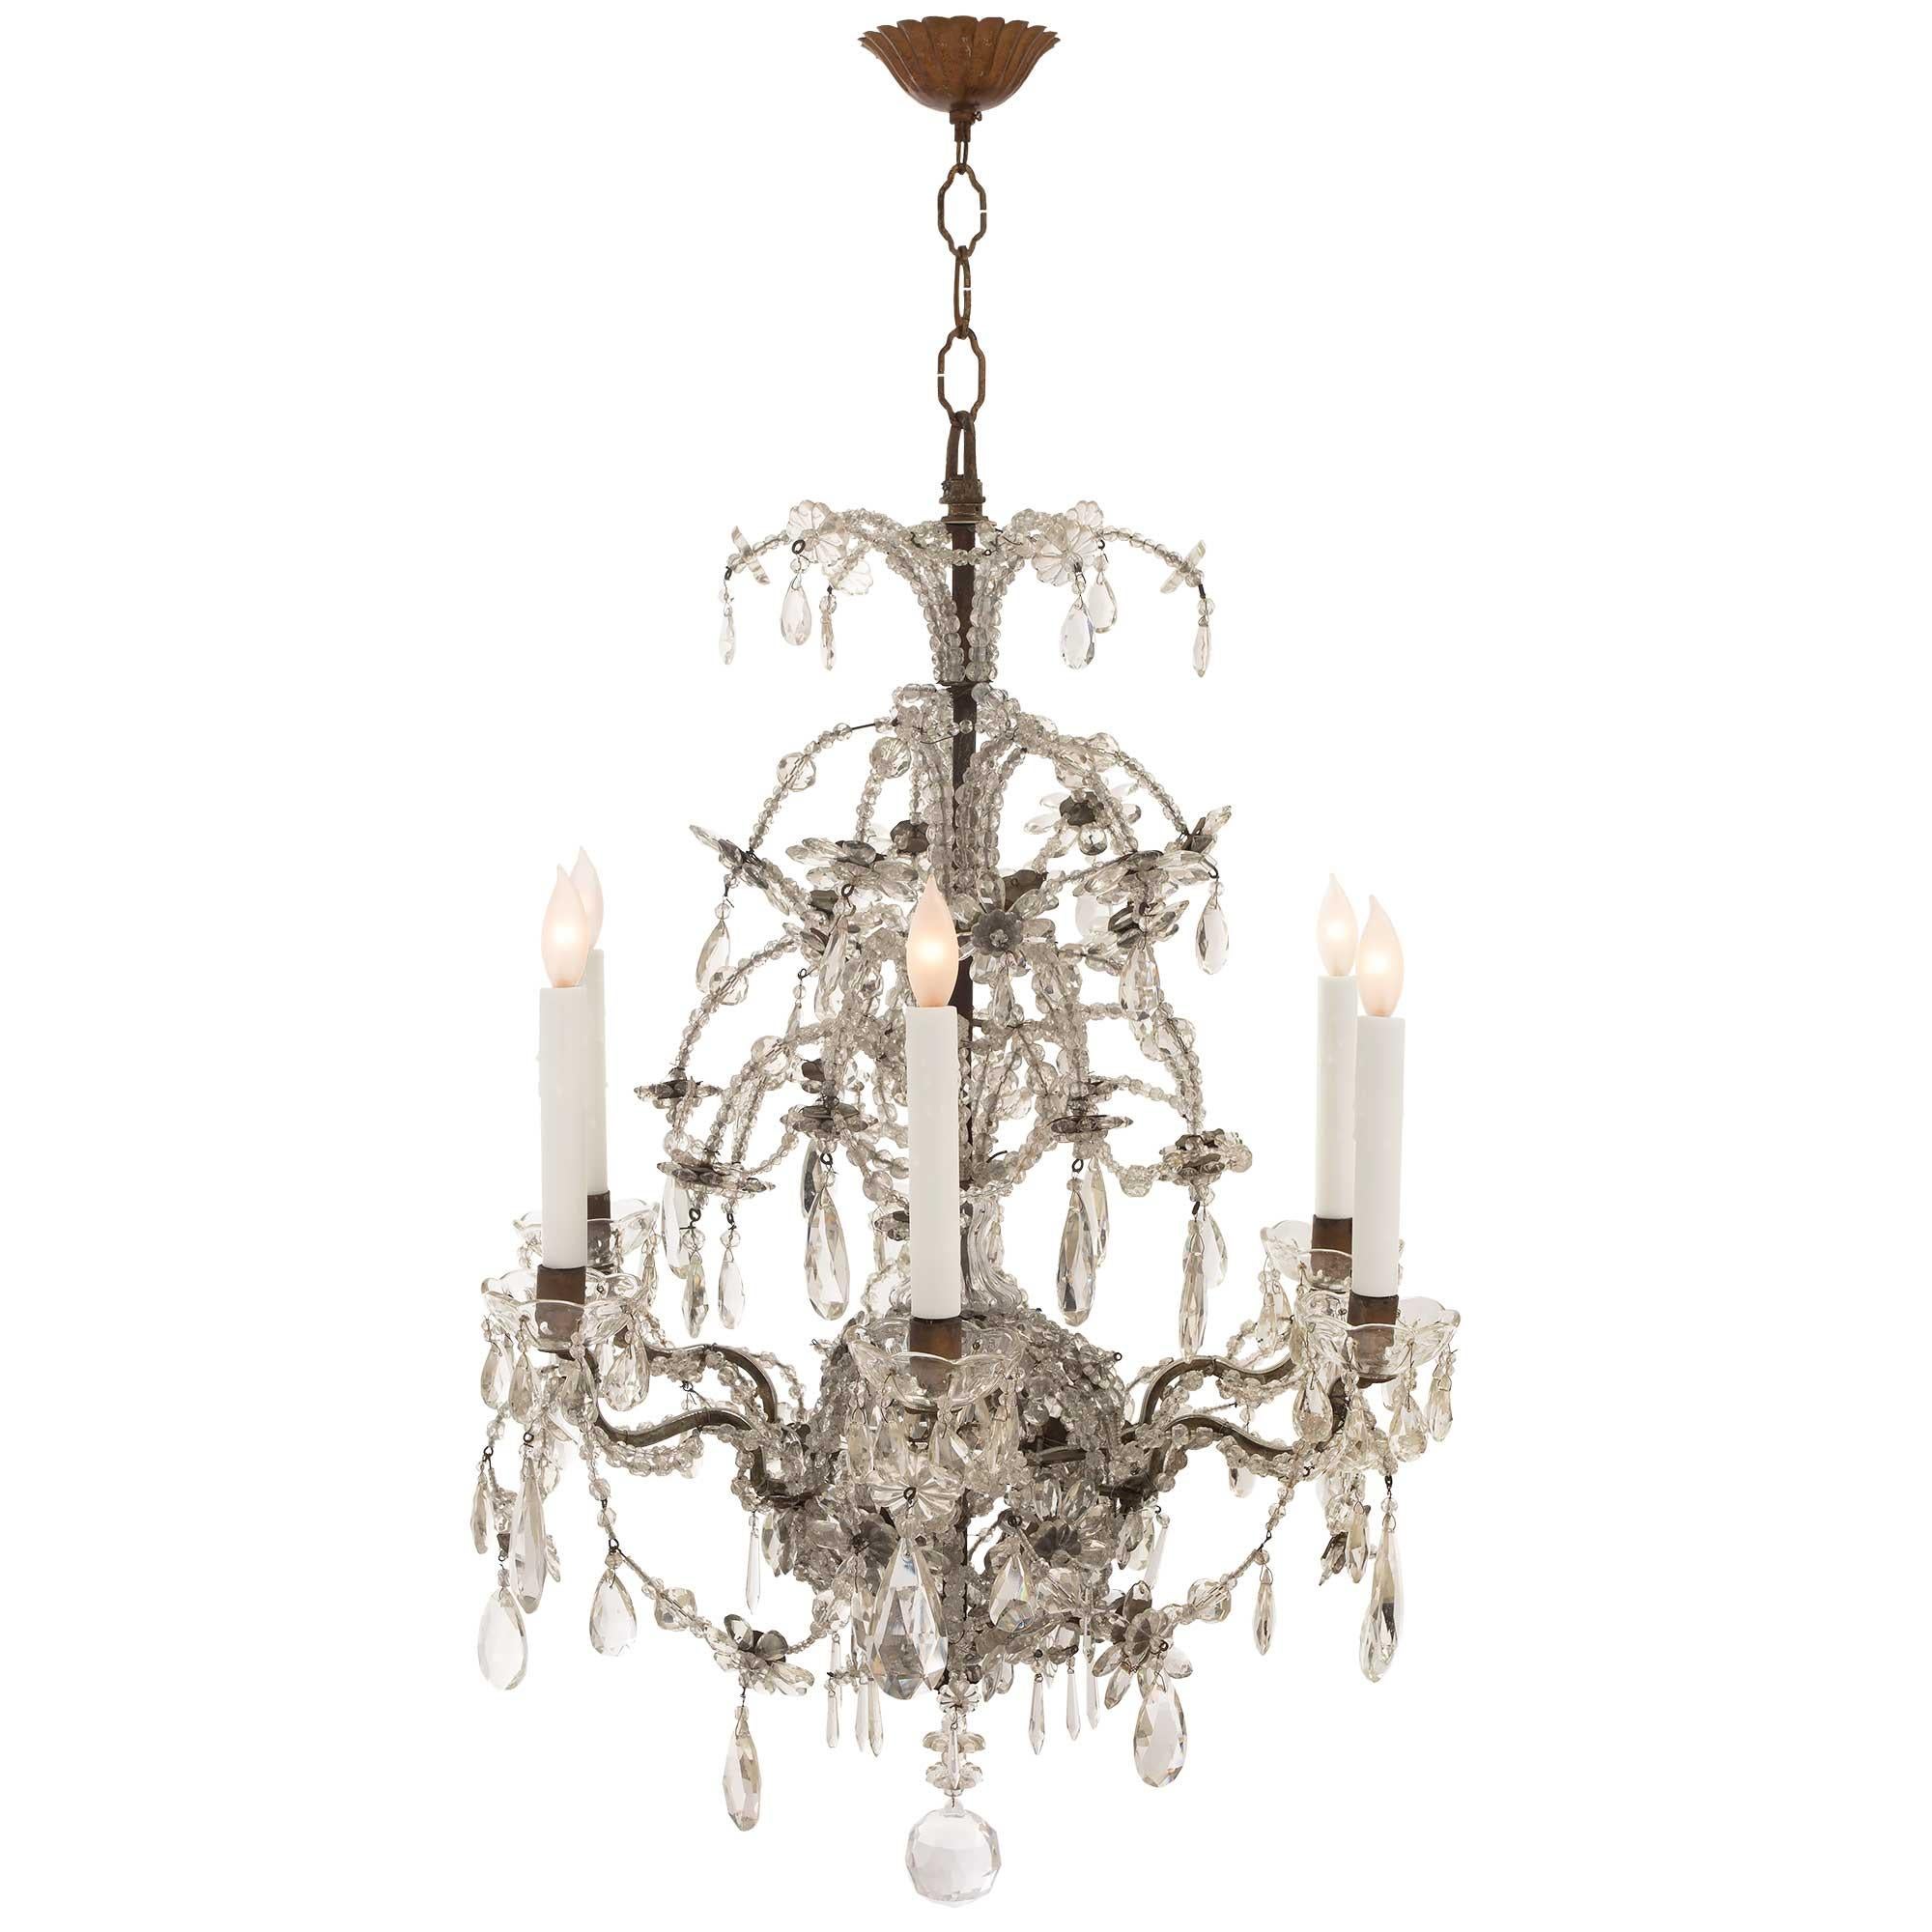 A beautiful Italian 19th century Louis XV st. cut glass, crystal and iron six arm chandelier. The chandelier is centered by a fine cut crystal ball at the bottom. Above is a fine array of prism and tear drop shaped crystal pendants and striking